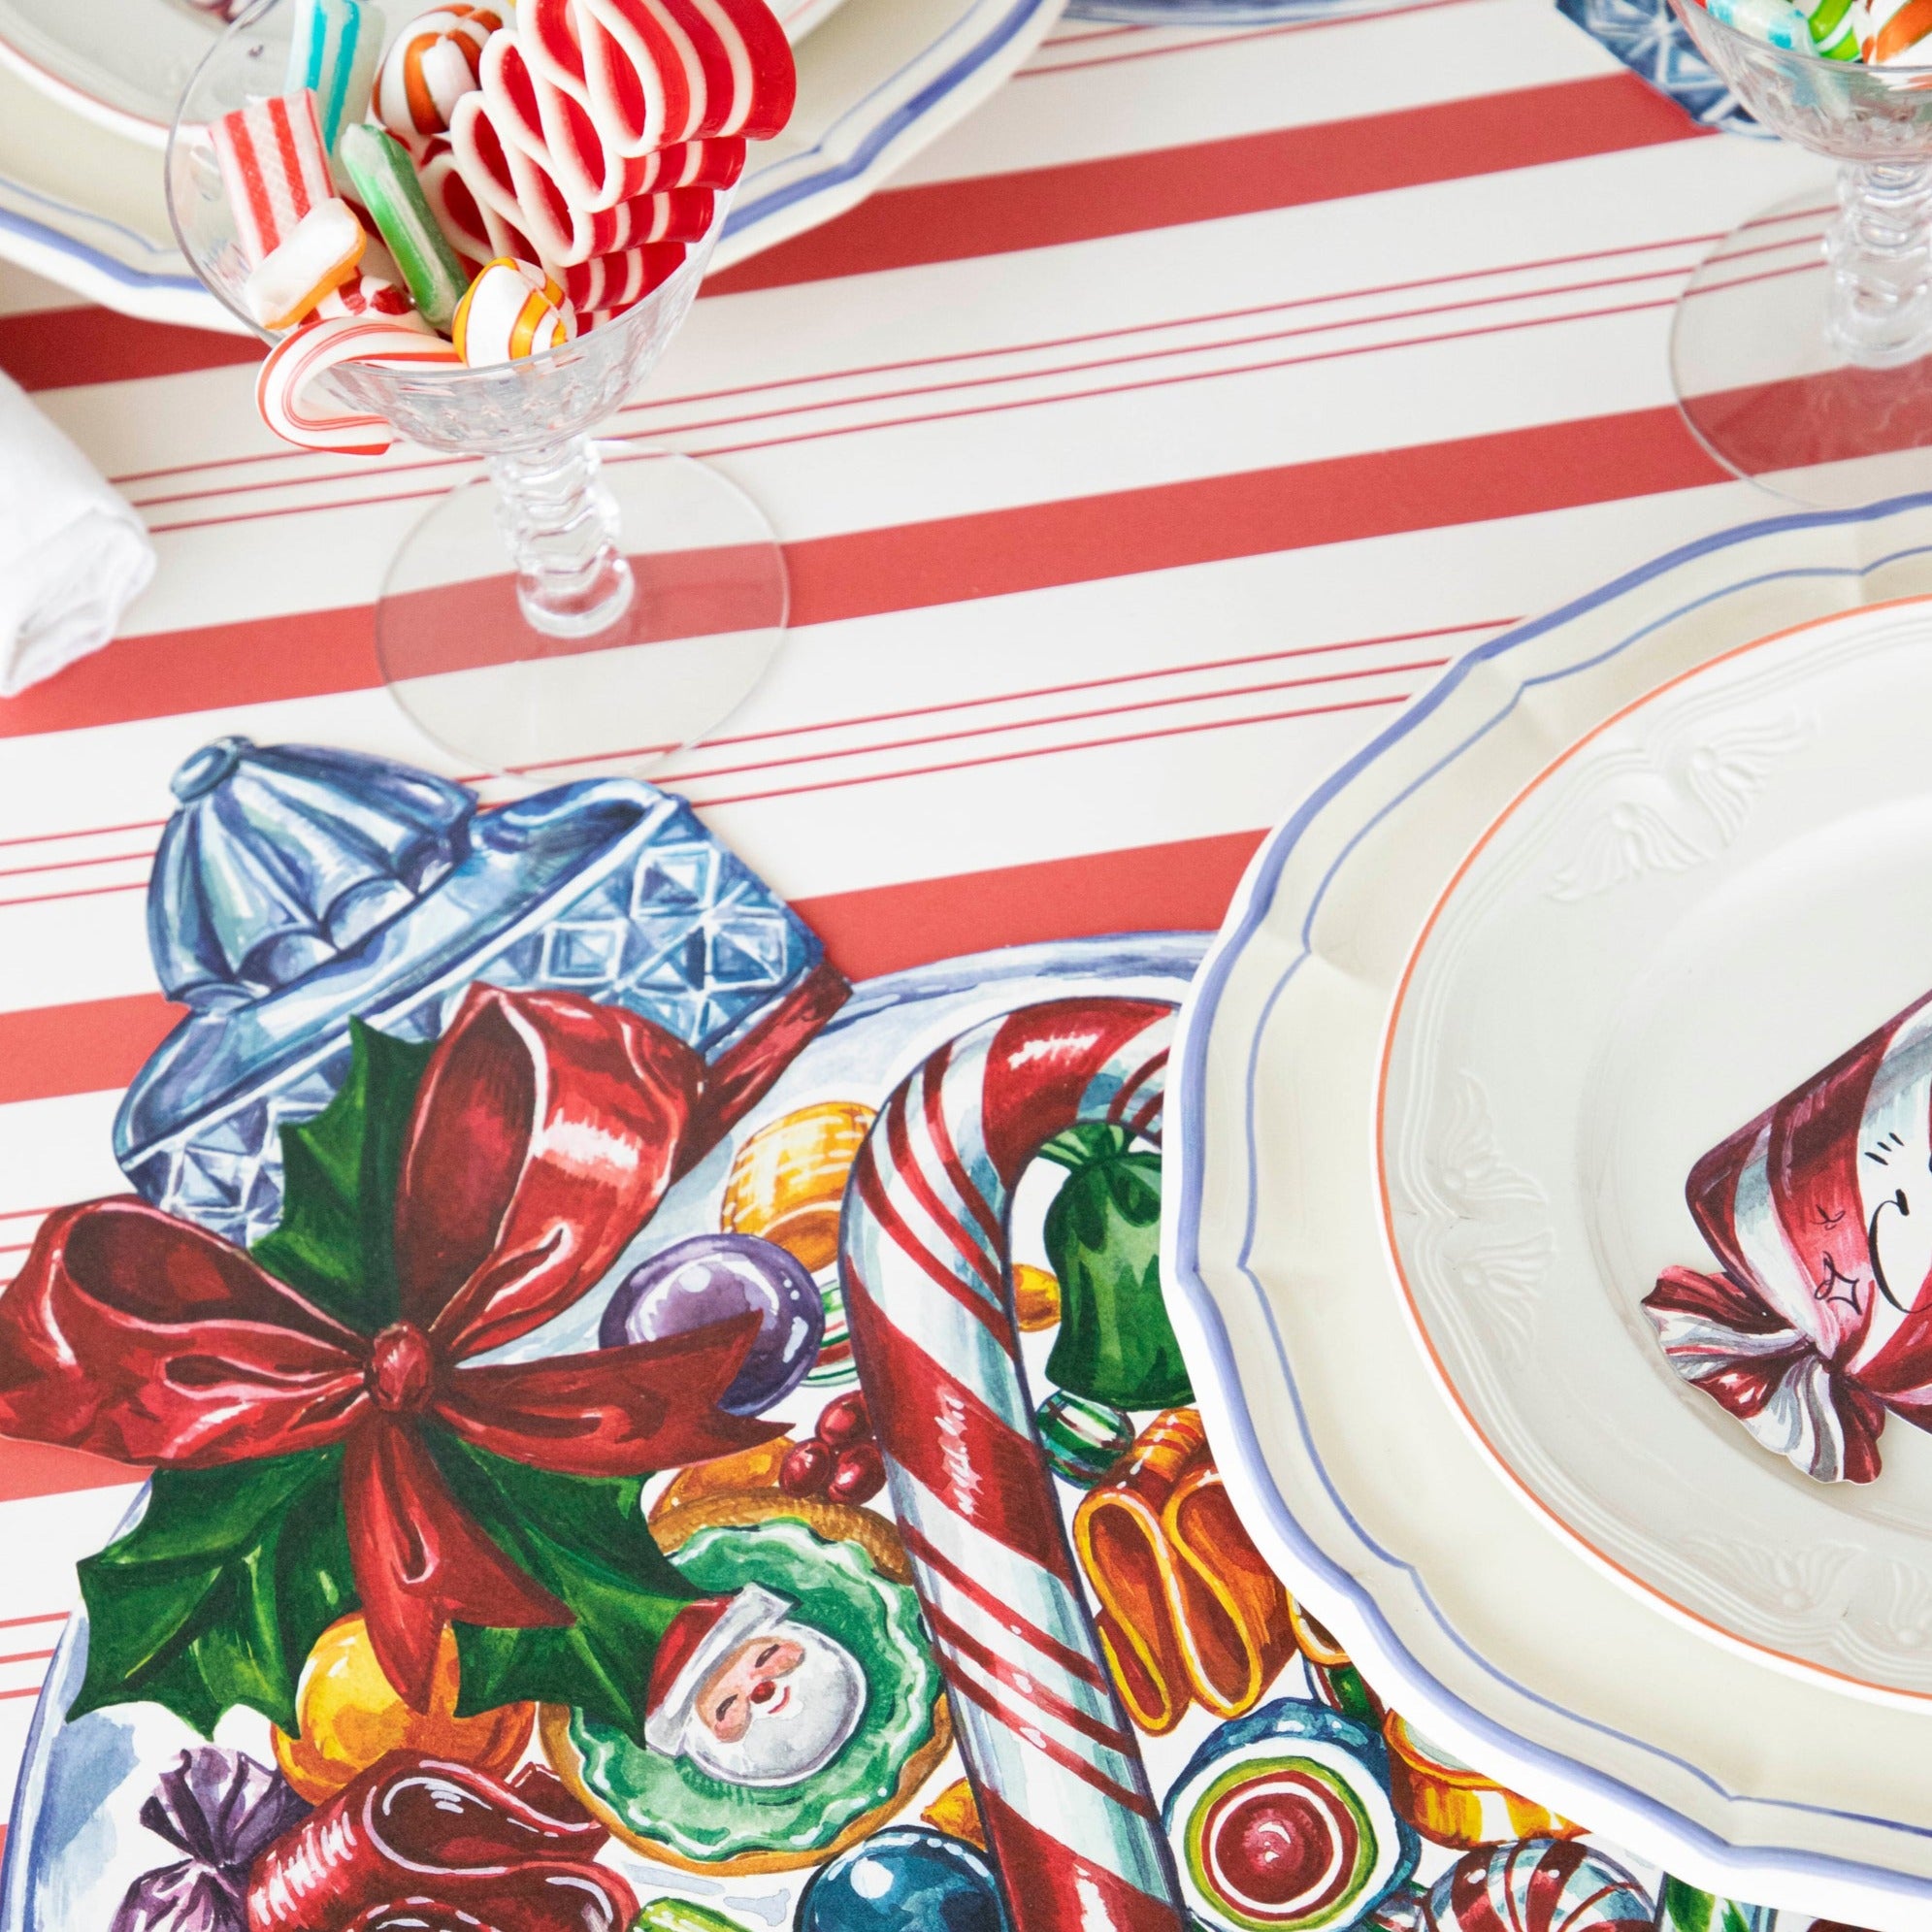 Close up of the Die-cut Candy Jar Placemat in a place setting, showing the candy artwork.